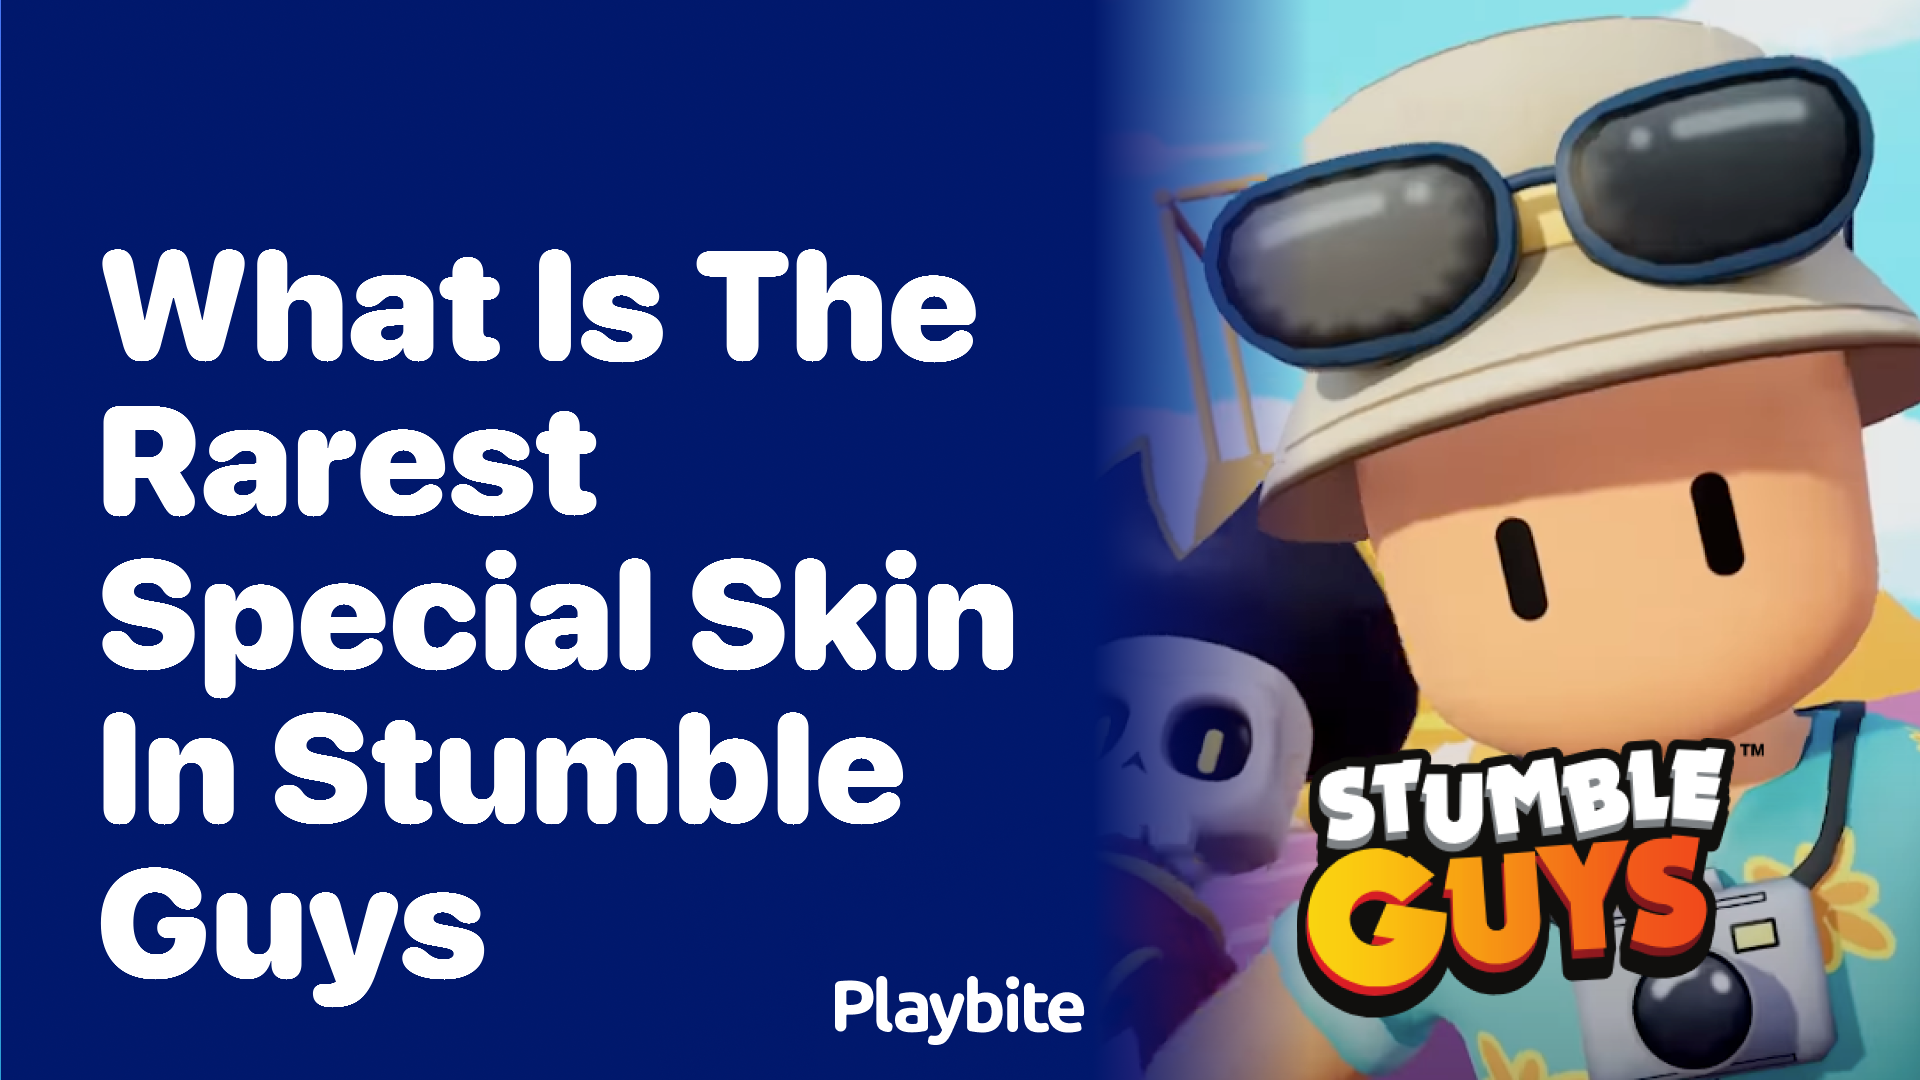 What Is the Rarest Special Skin in Stumble Guys?